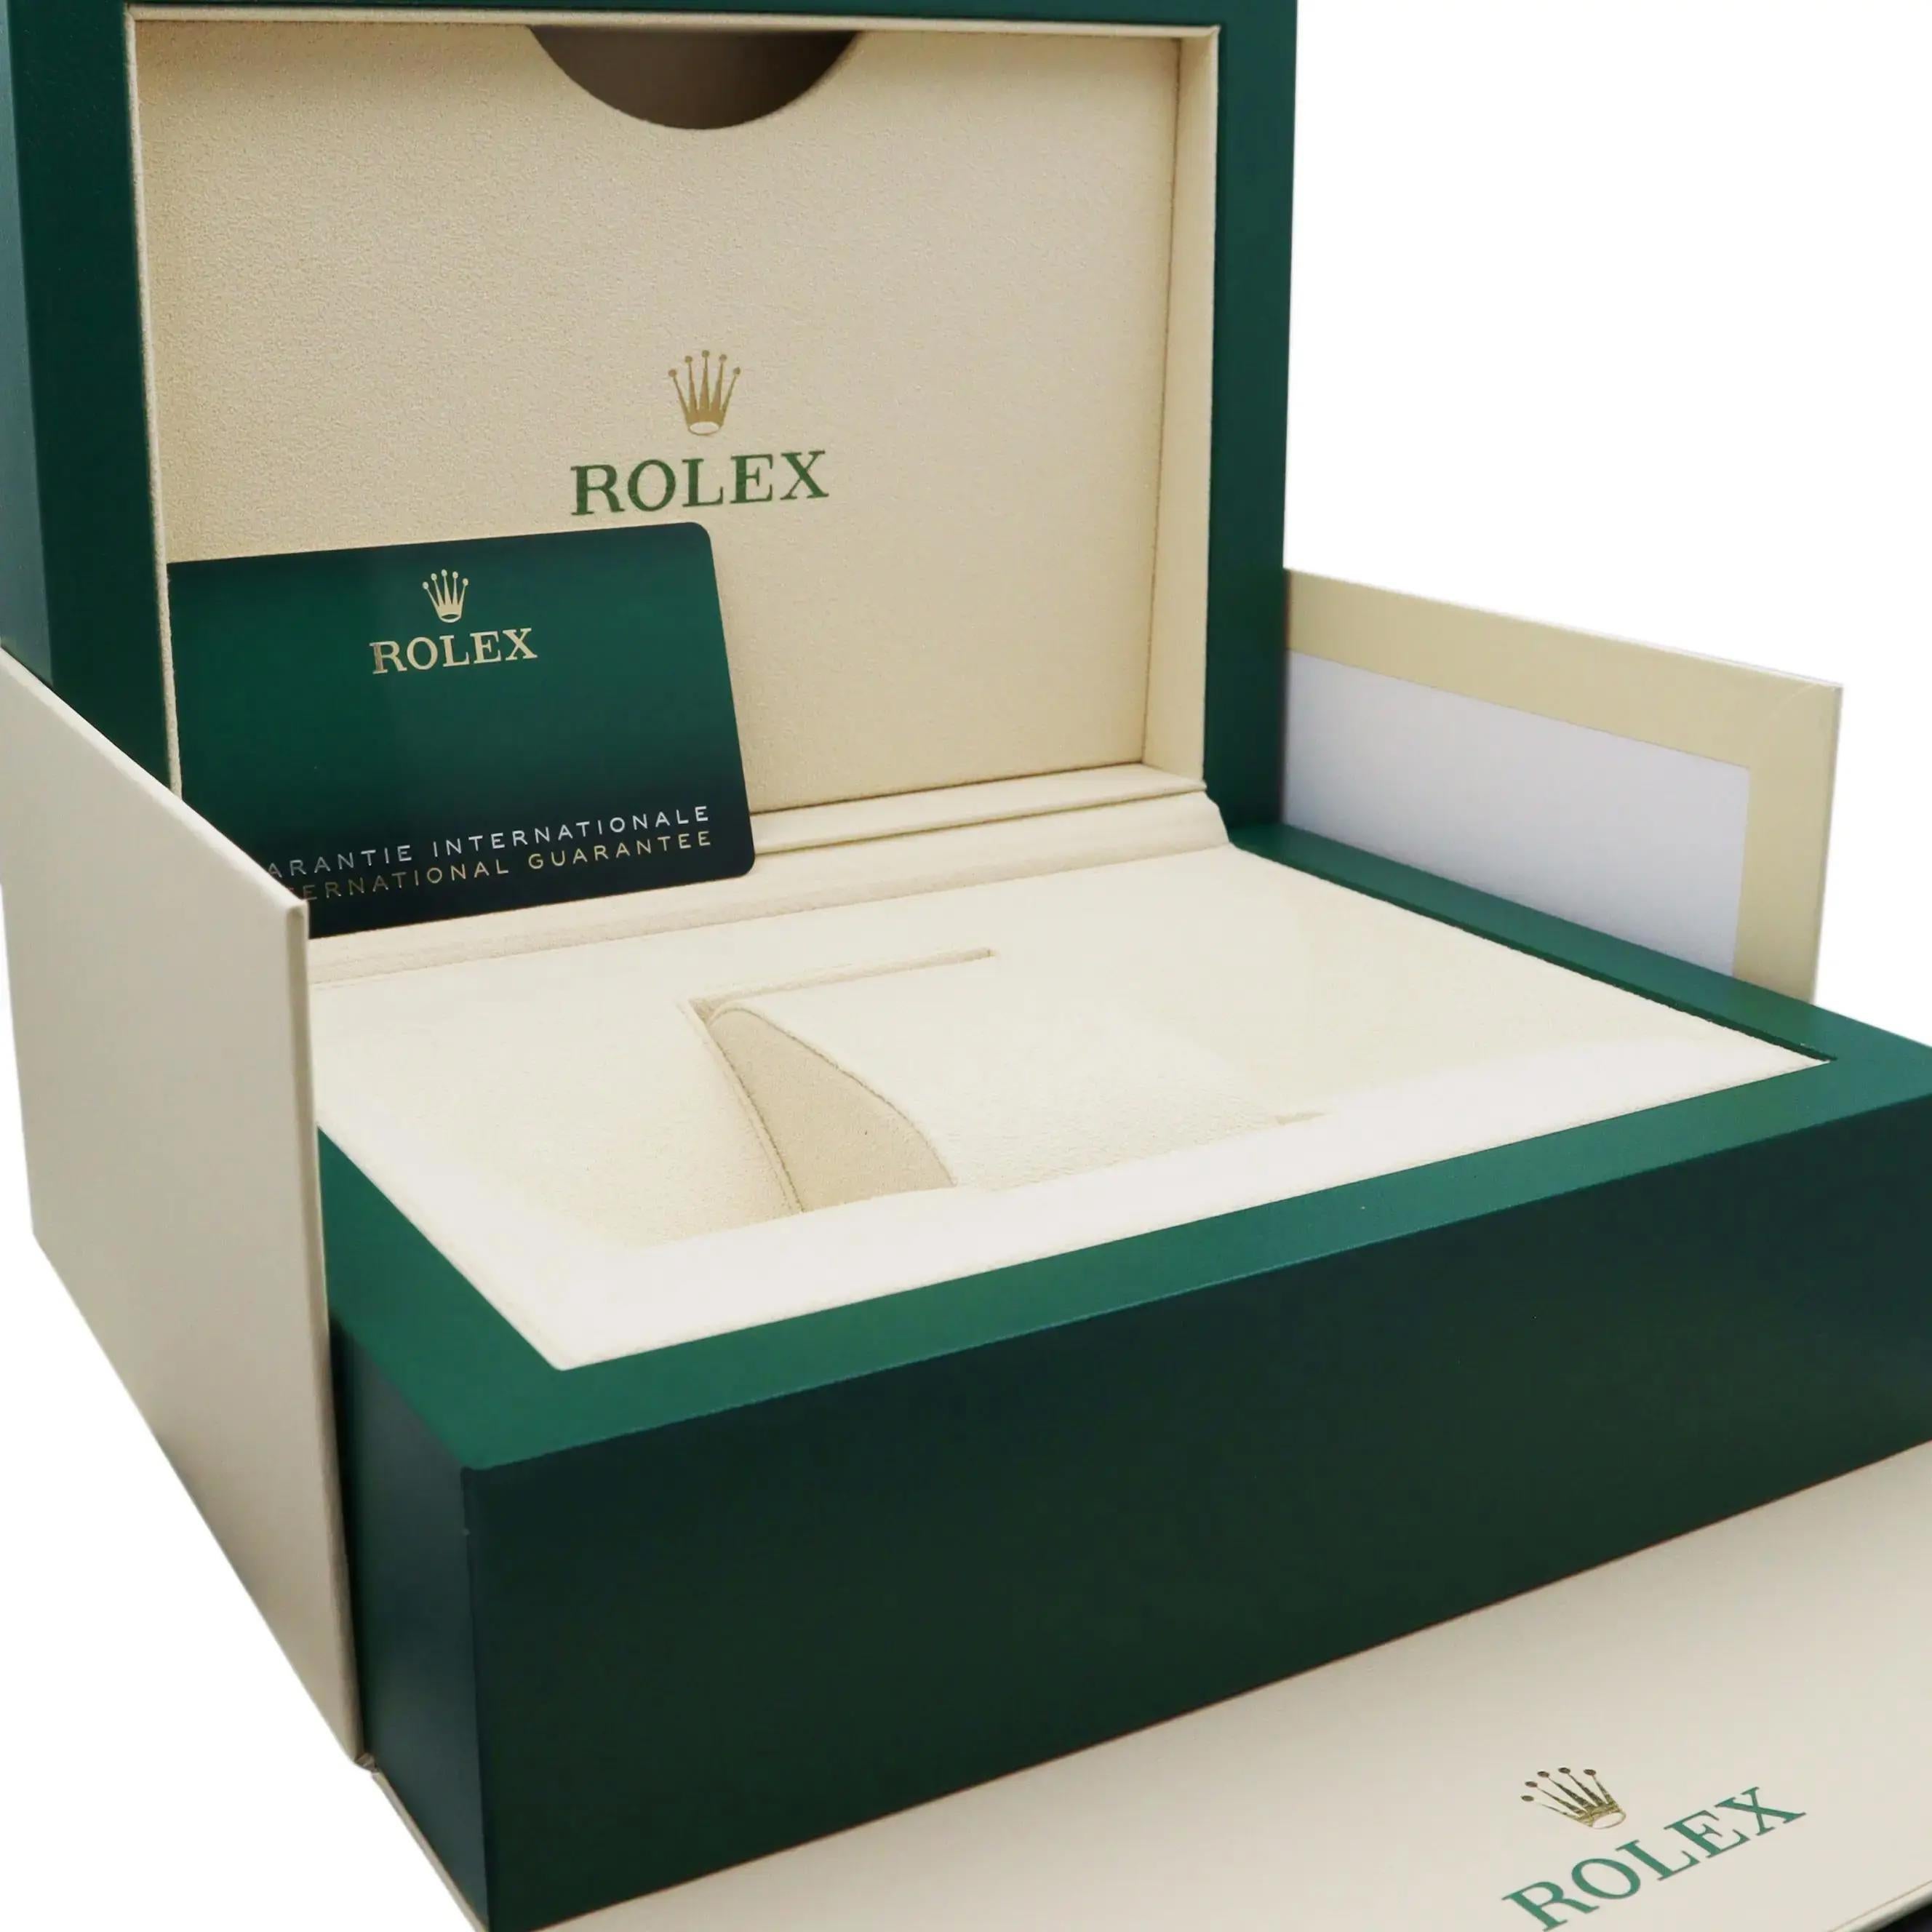 NEW Rolex Datejust 41 Steel White Gold Mint Green Dial Automatic Watch 126334 For Sale 1